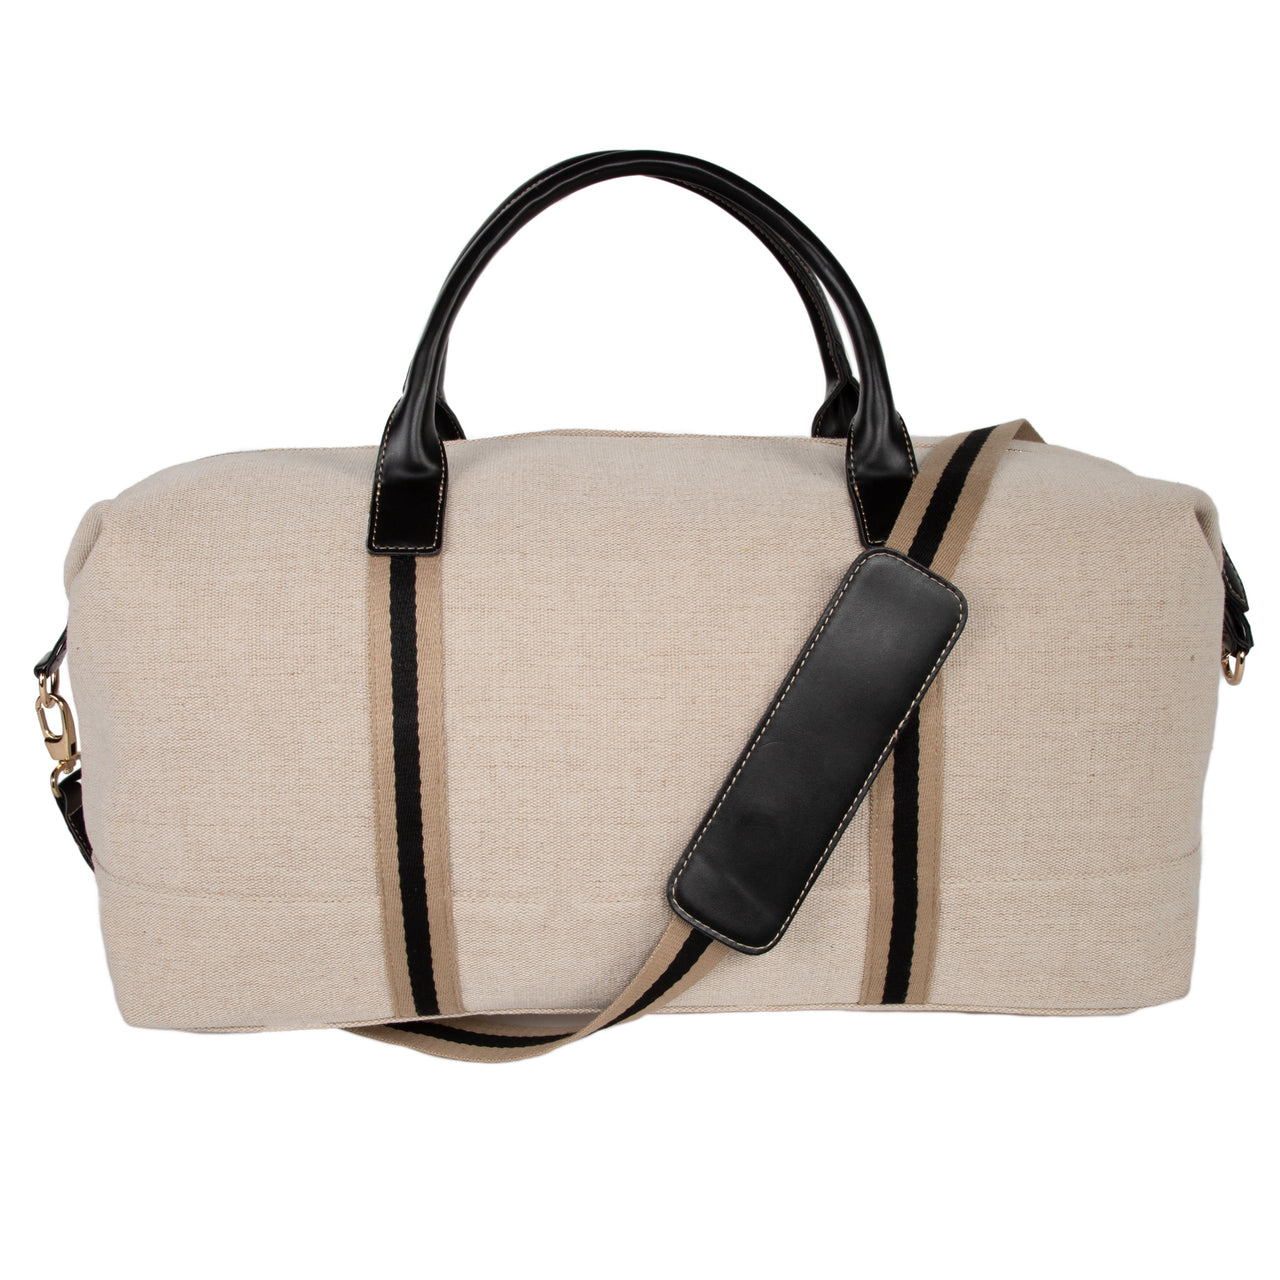 The Perry Duffel Bag